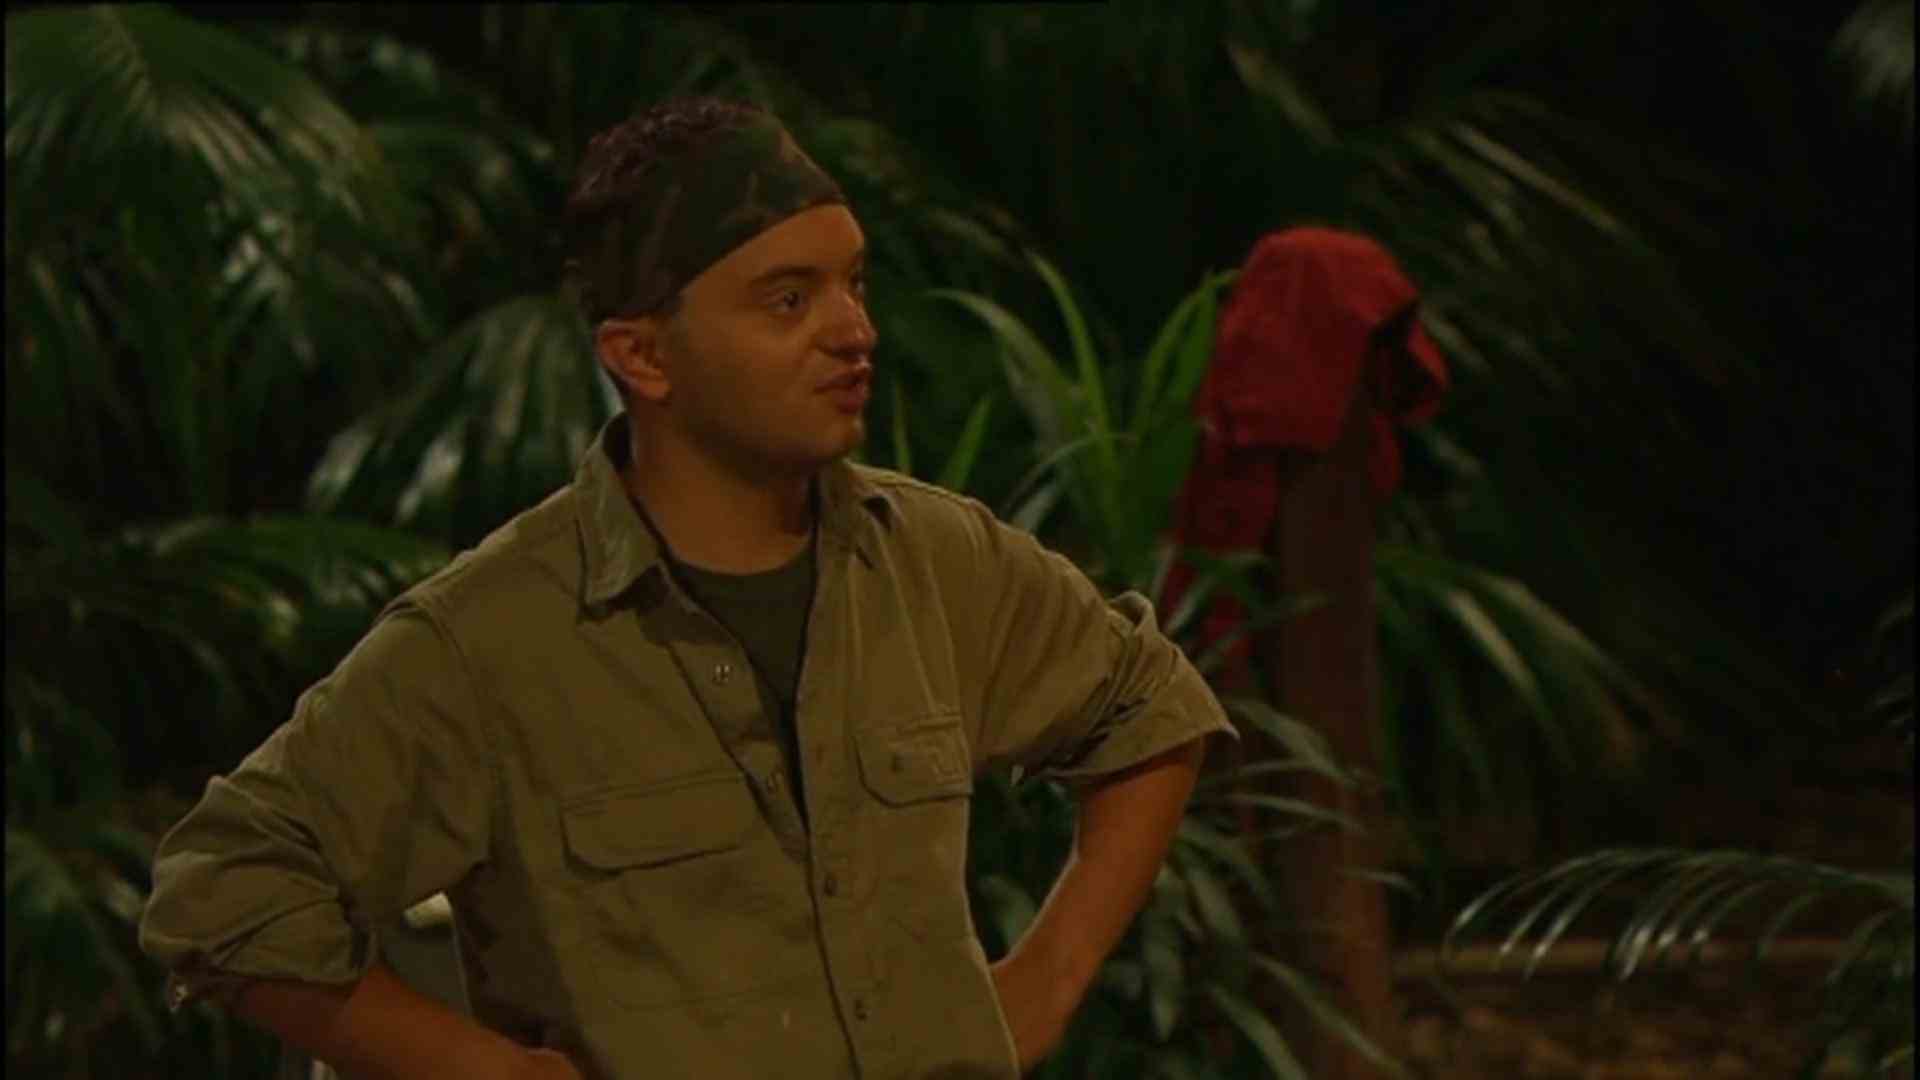 Julian "WC" Stoeckel and the shit problem jungle camp throwback